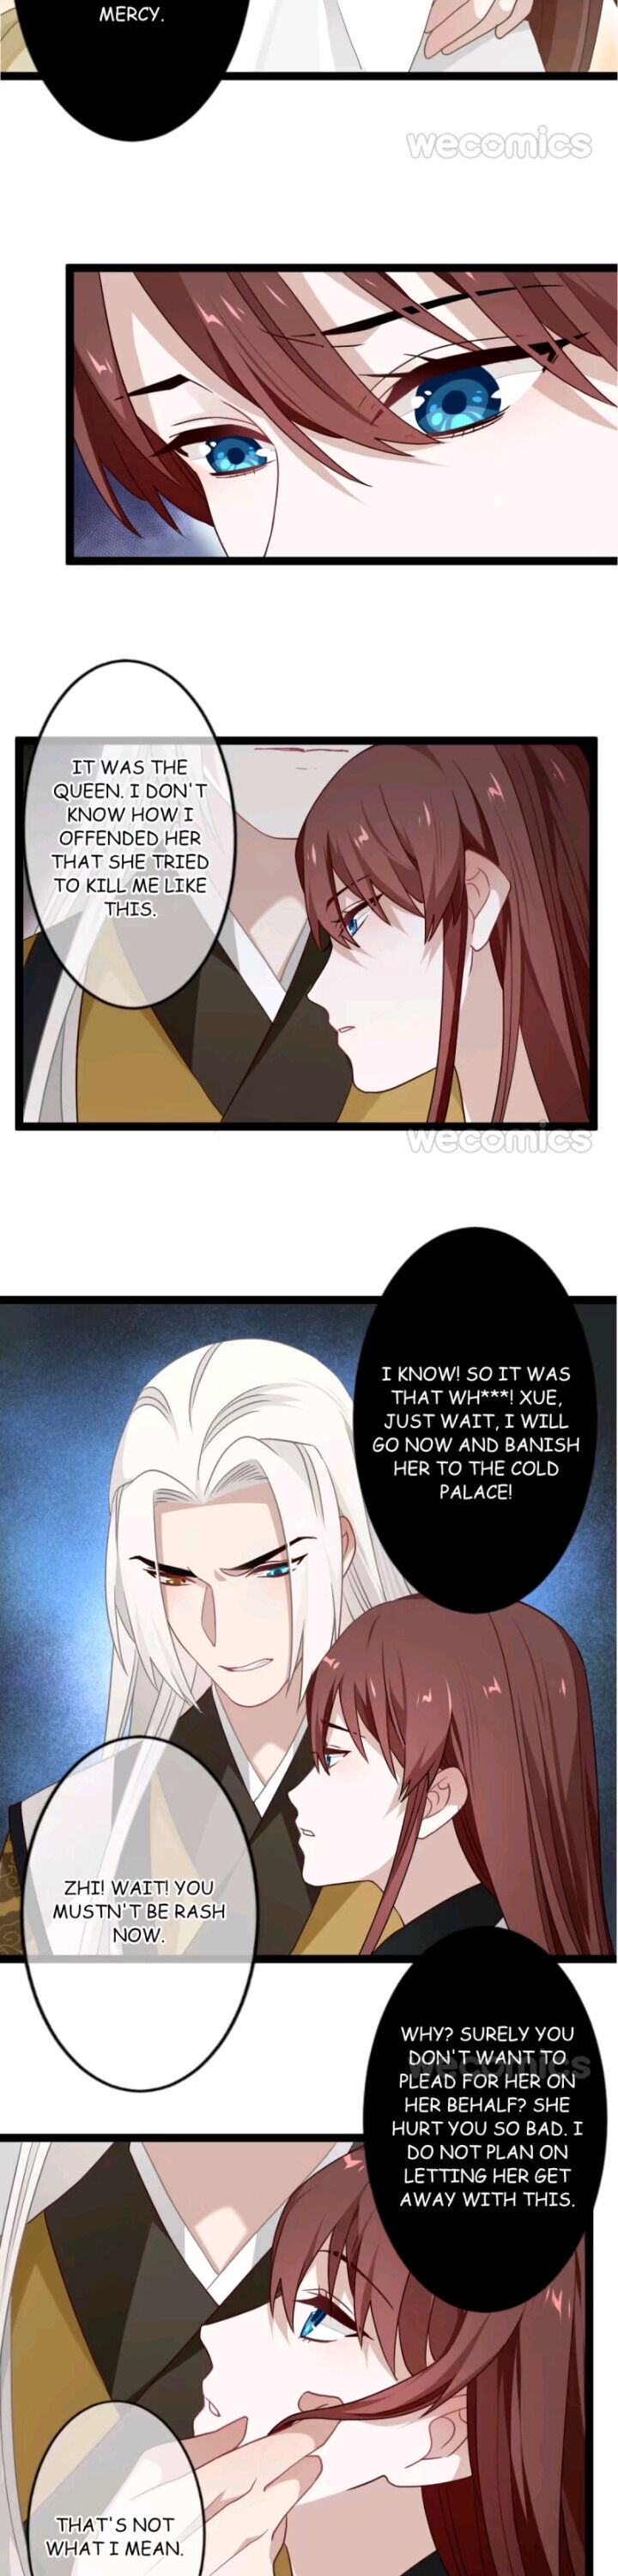 Curse of Loulan: The Tyrant Bestows Favor on Me - chapter 90 - #3